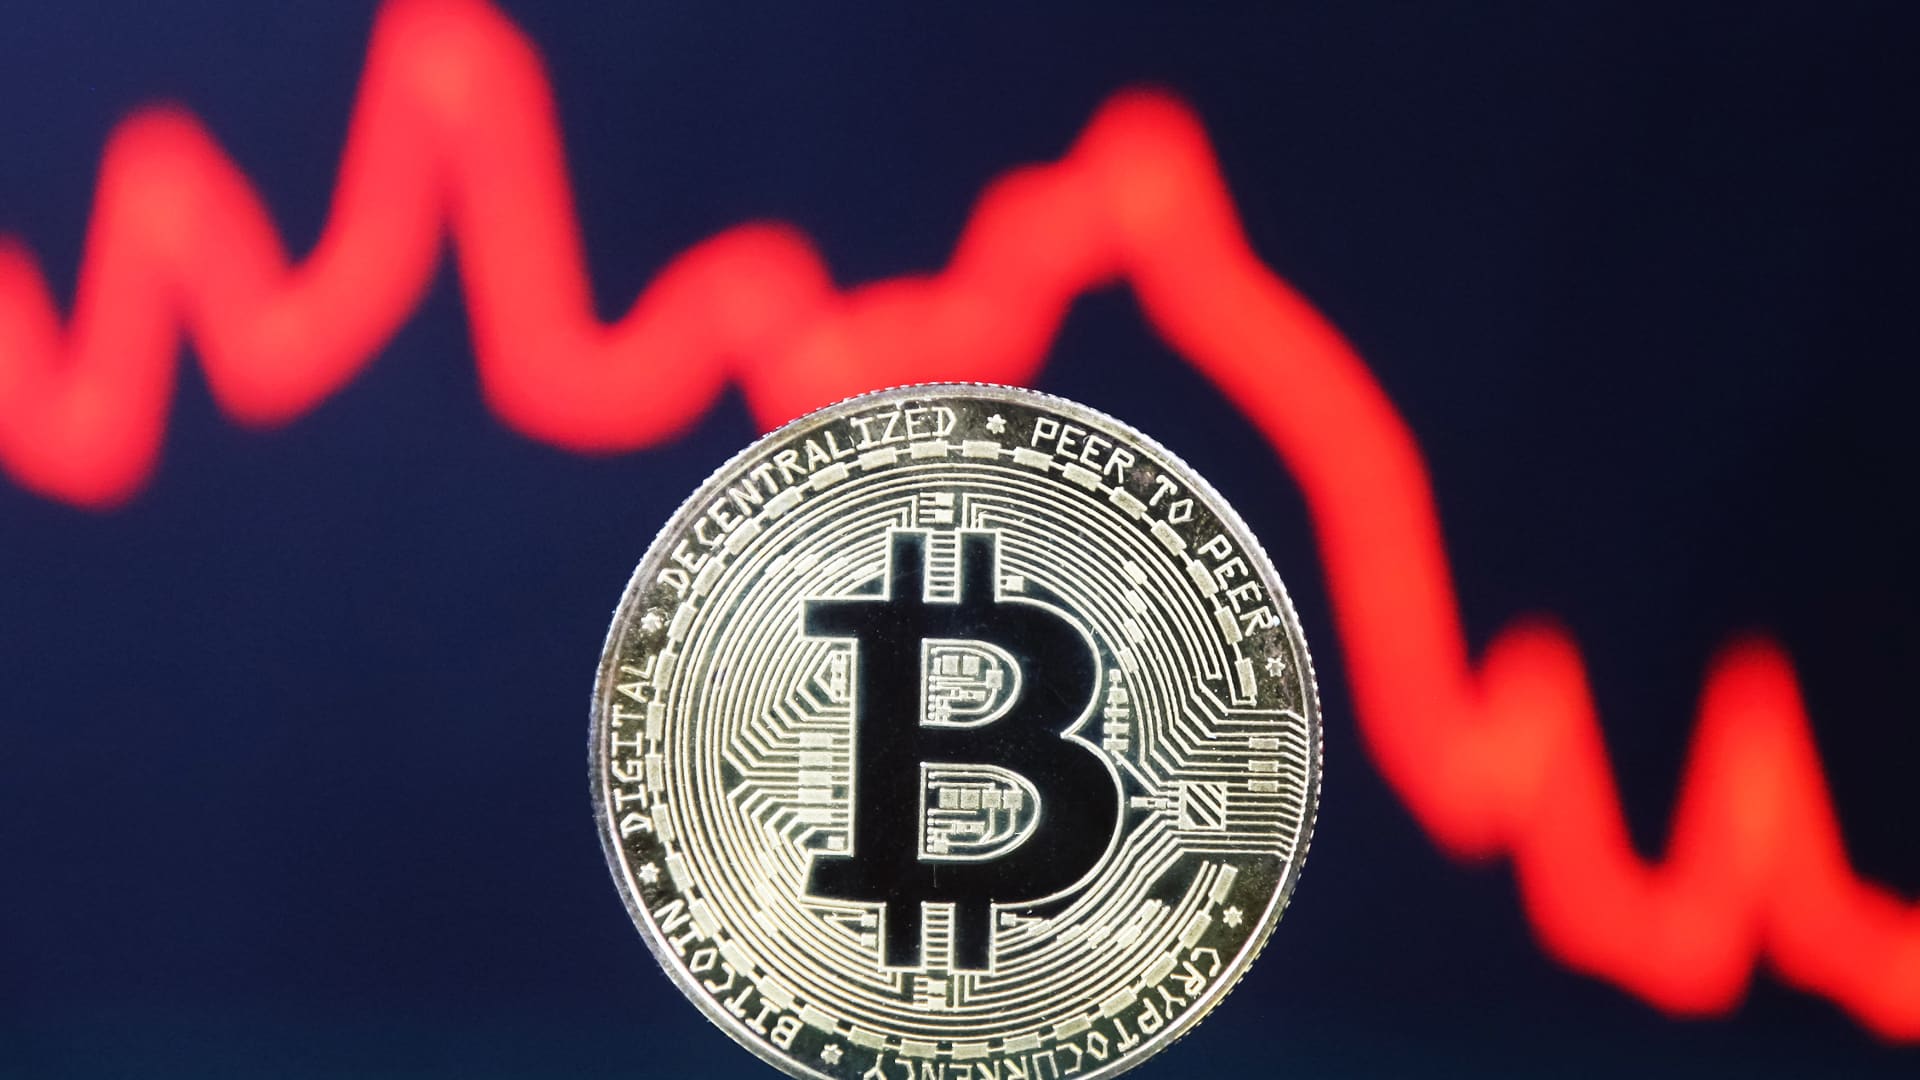 Bitcoin (BTC) Price Drops to 2-Month Low After Fed Minutes